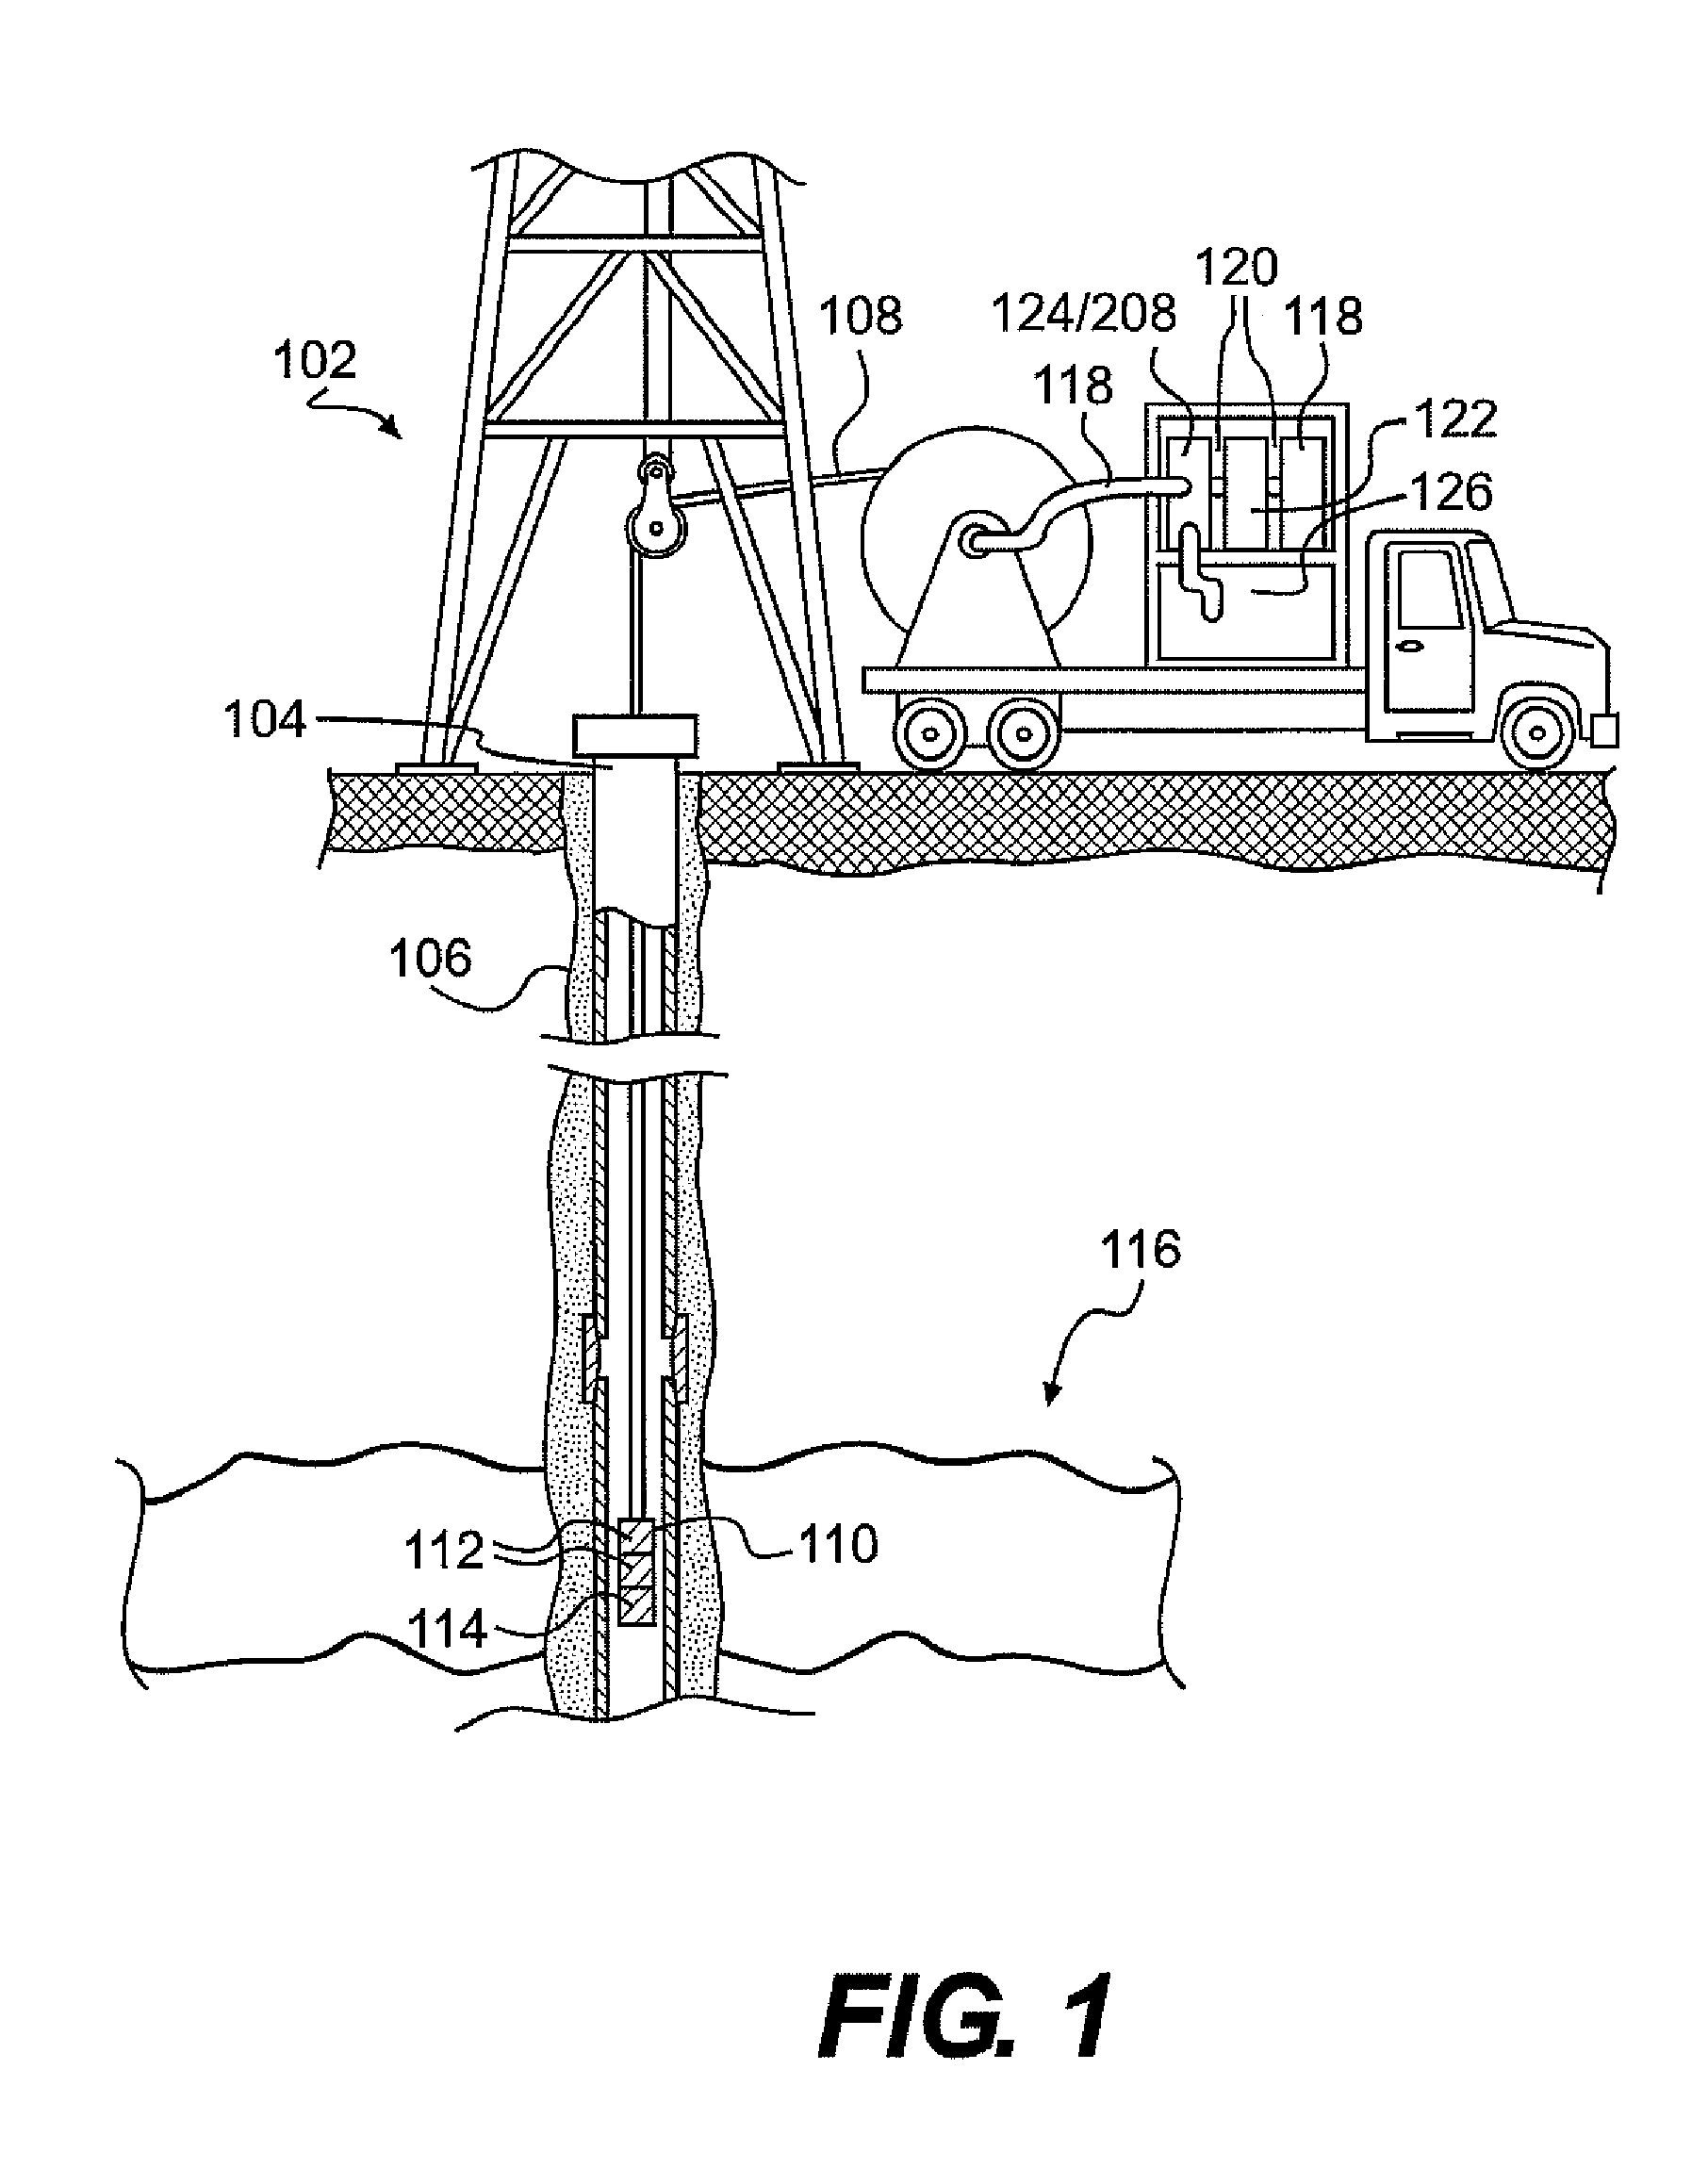 Optical fiber system and method for wellhole sensing of magnetic permeability using diffraction effect of faraday rotator